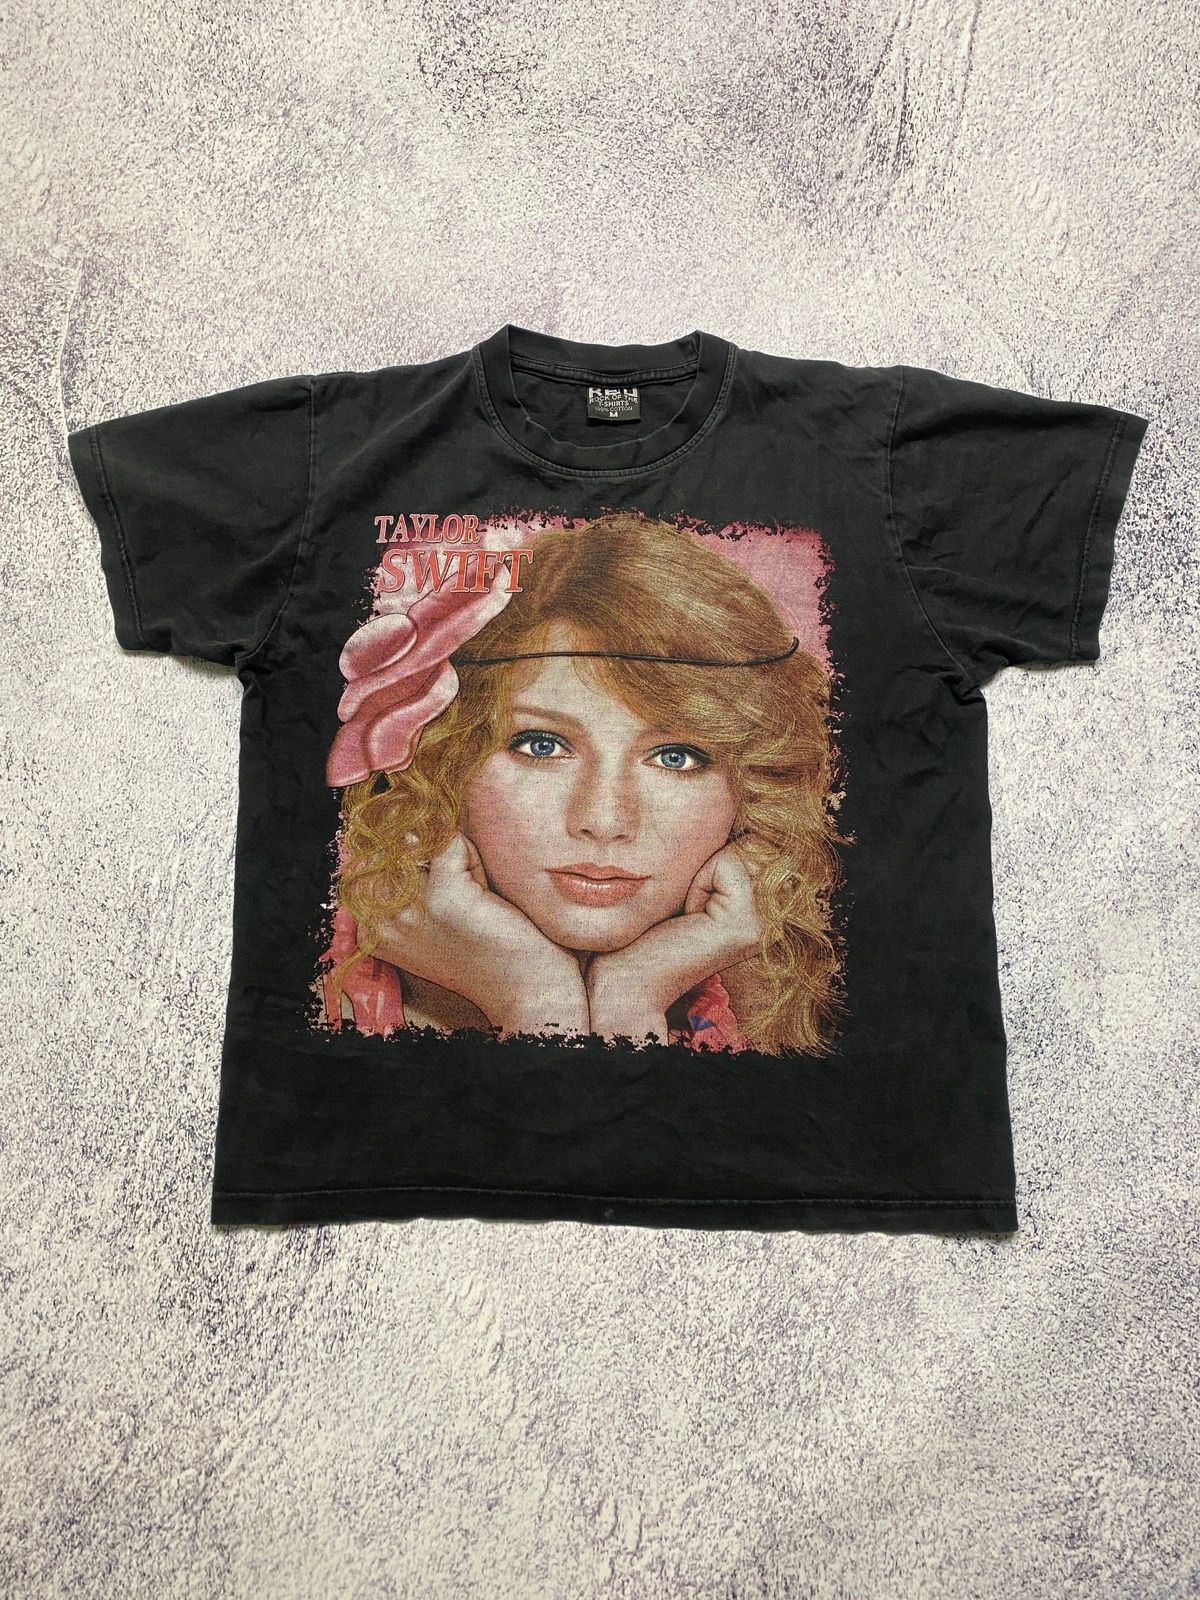 Pre-owned Band Tees X Rock T Shirt Vintage Taylor Swift T Shirt 90's Tee Lady Gaga Bieber In Faded Black